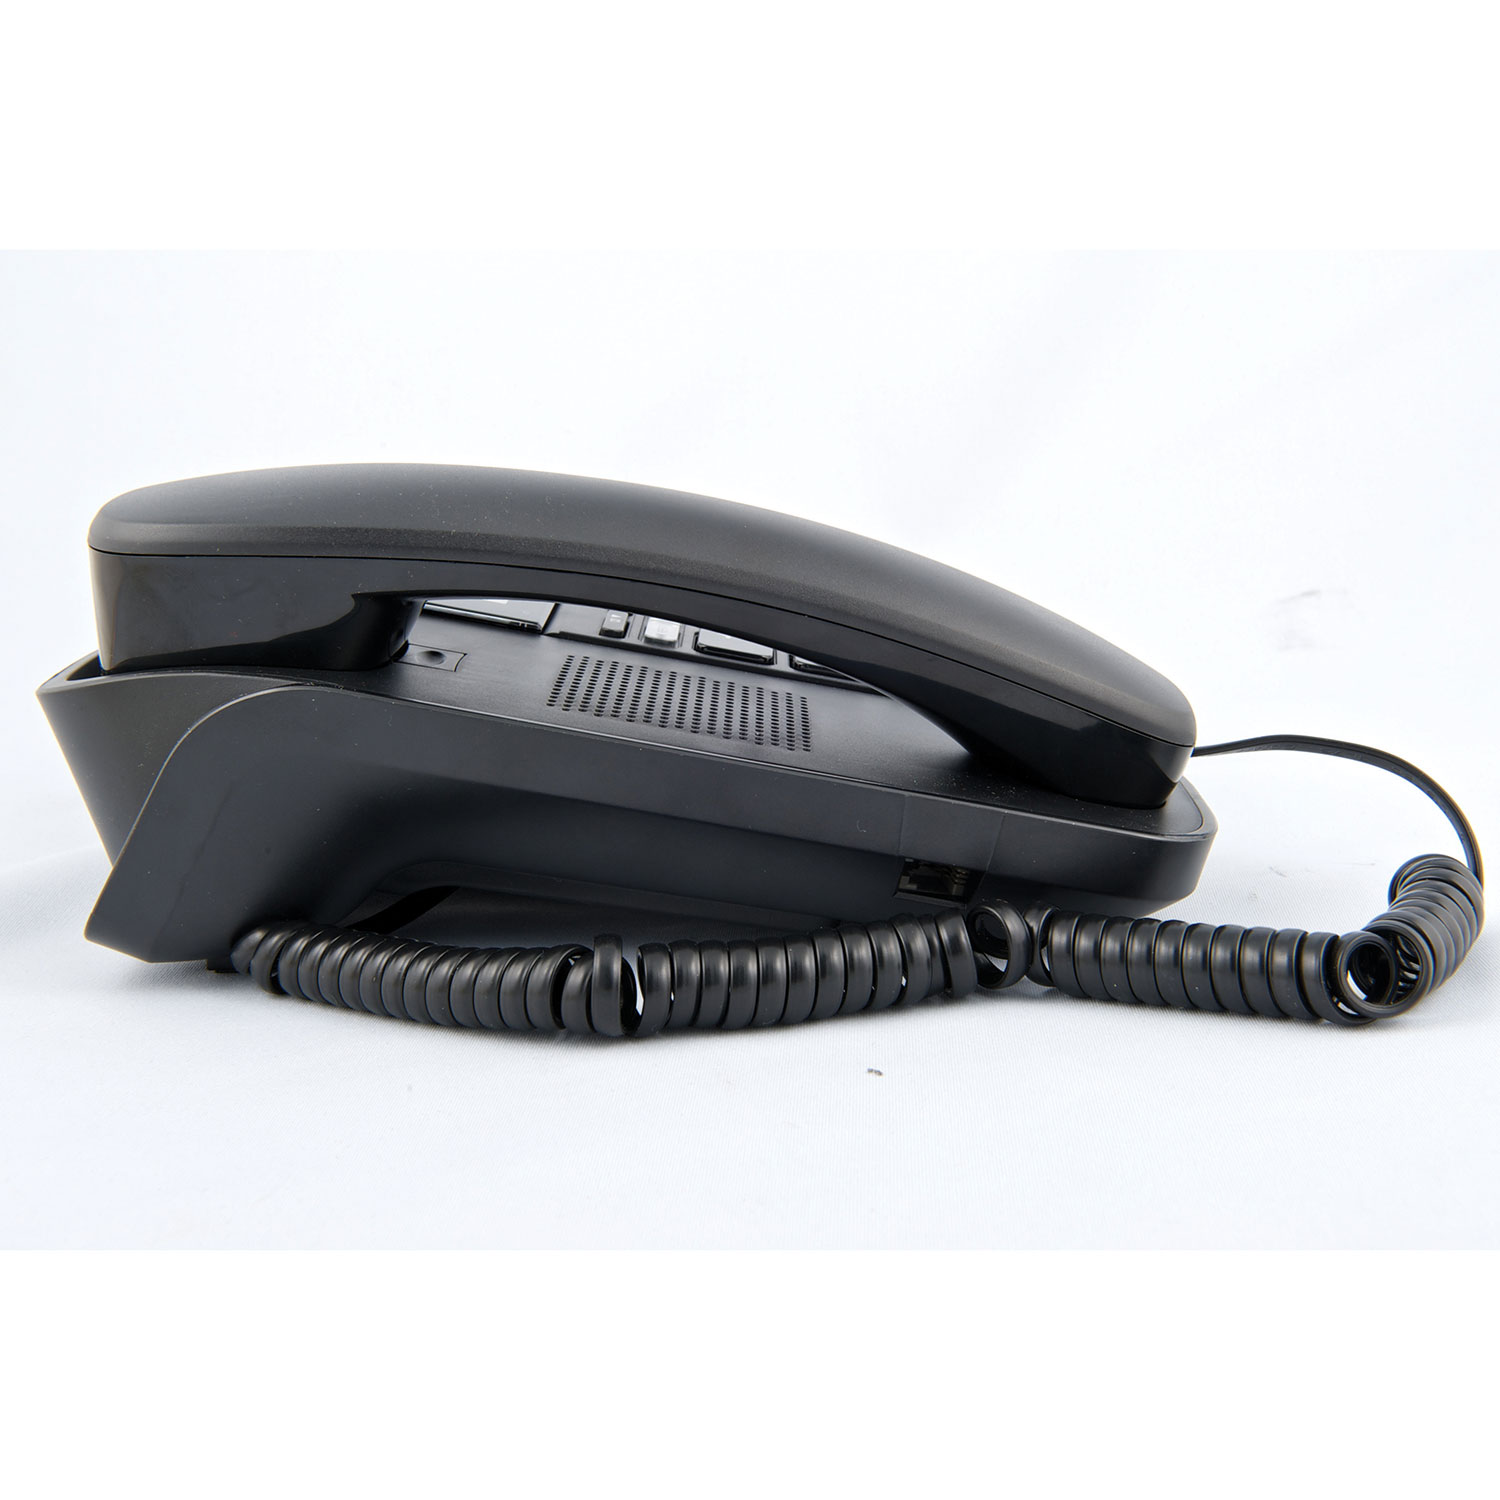 AT&T Corded Phone With Answering Machine (CL4940) - Black